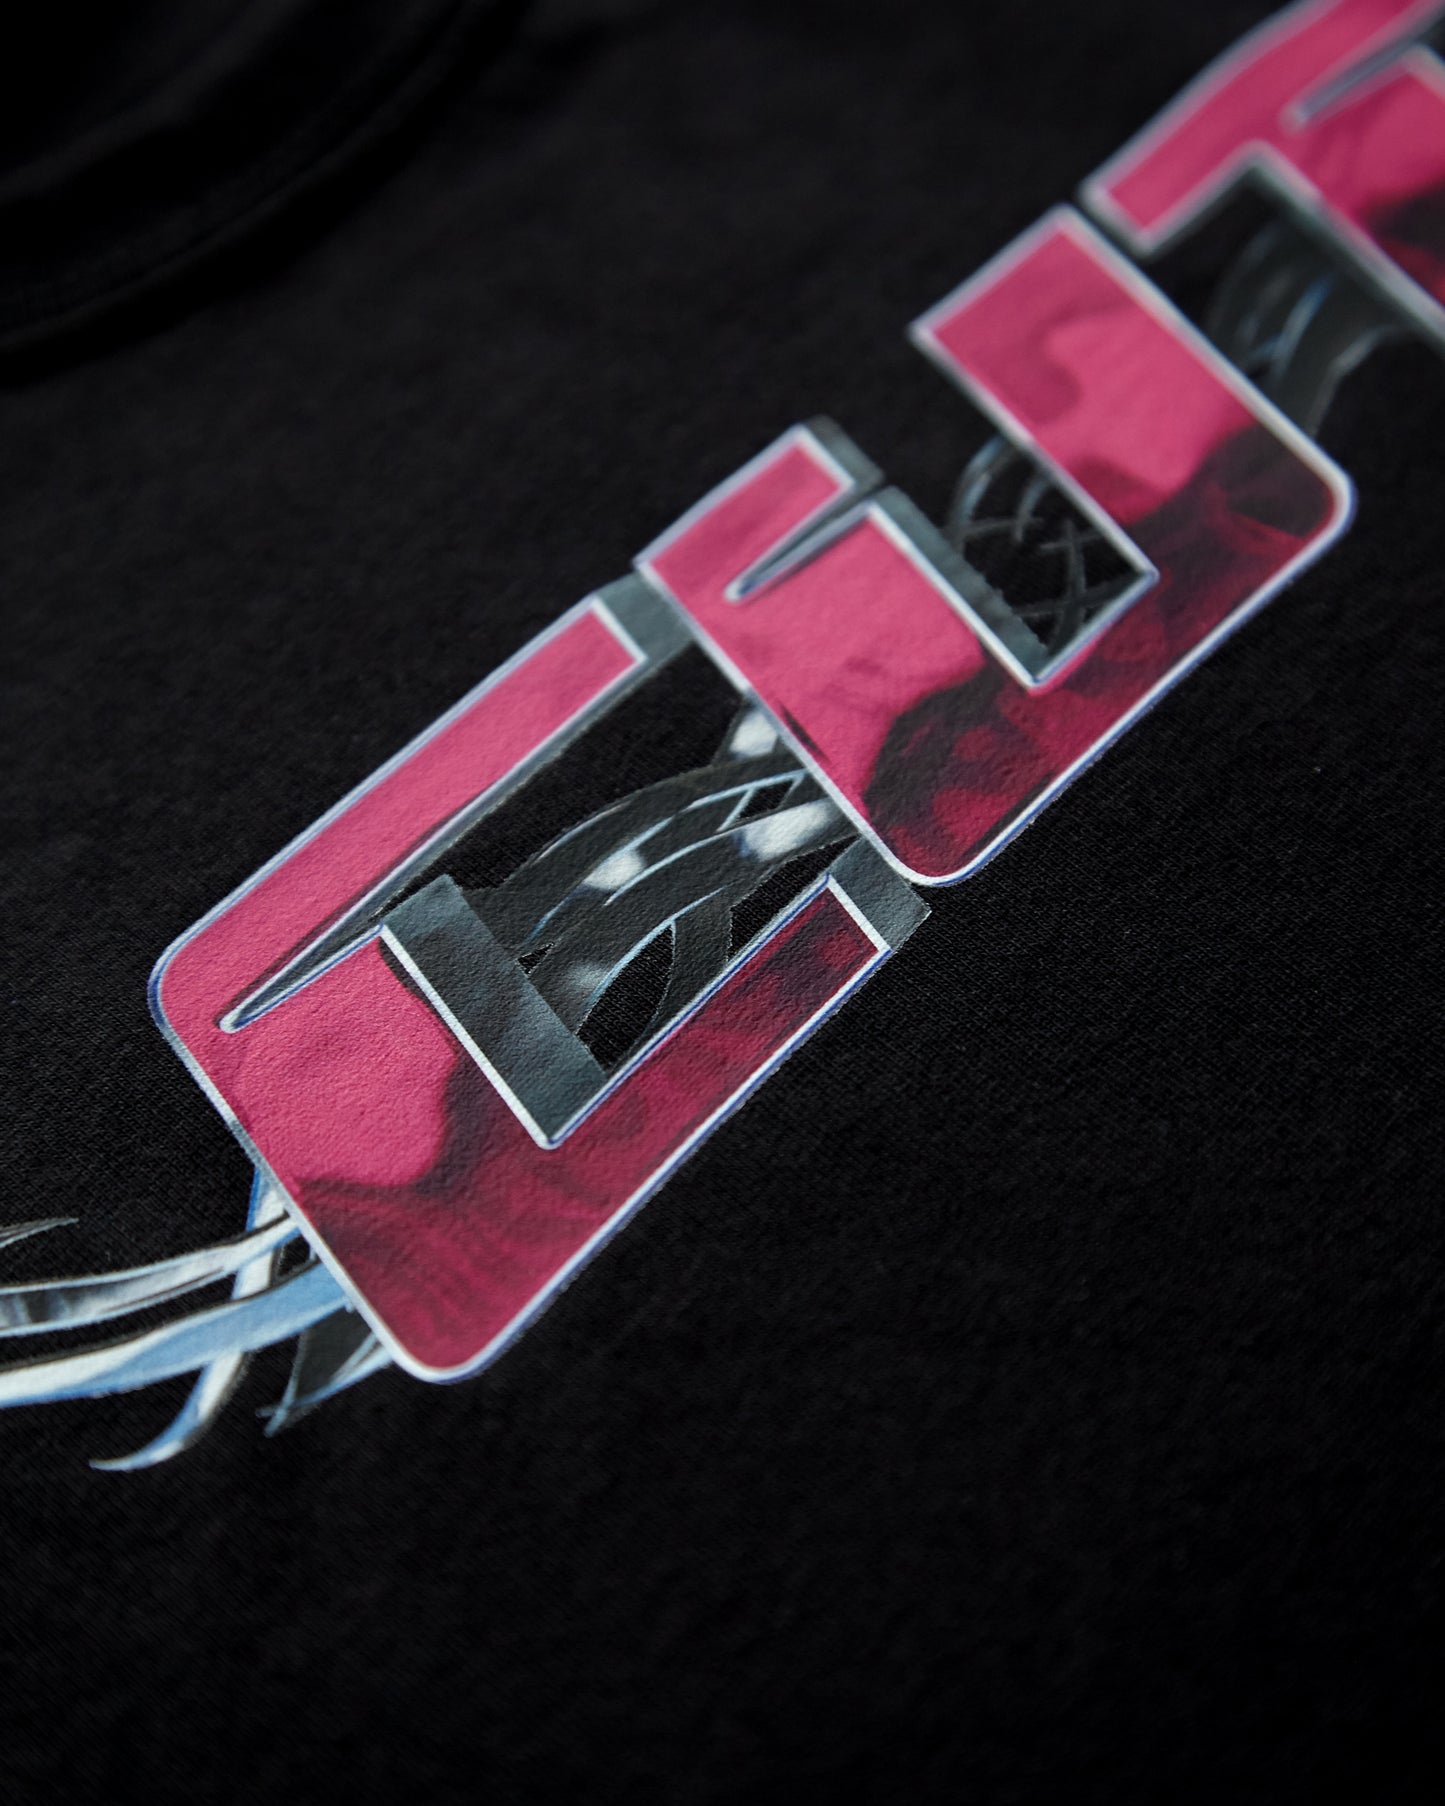 Chrome Y2K: CUT, pink and silver on black - sleeveless crop top.